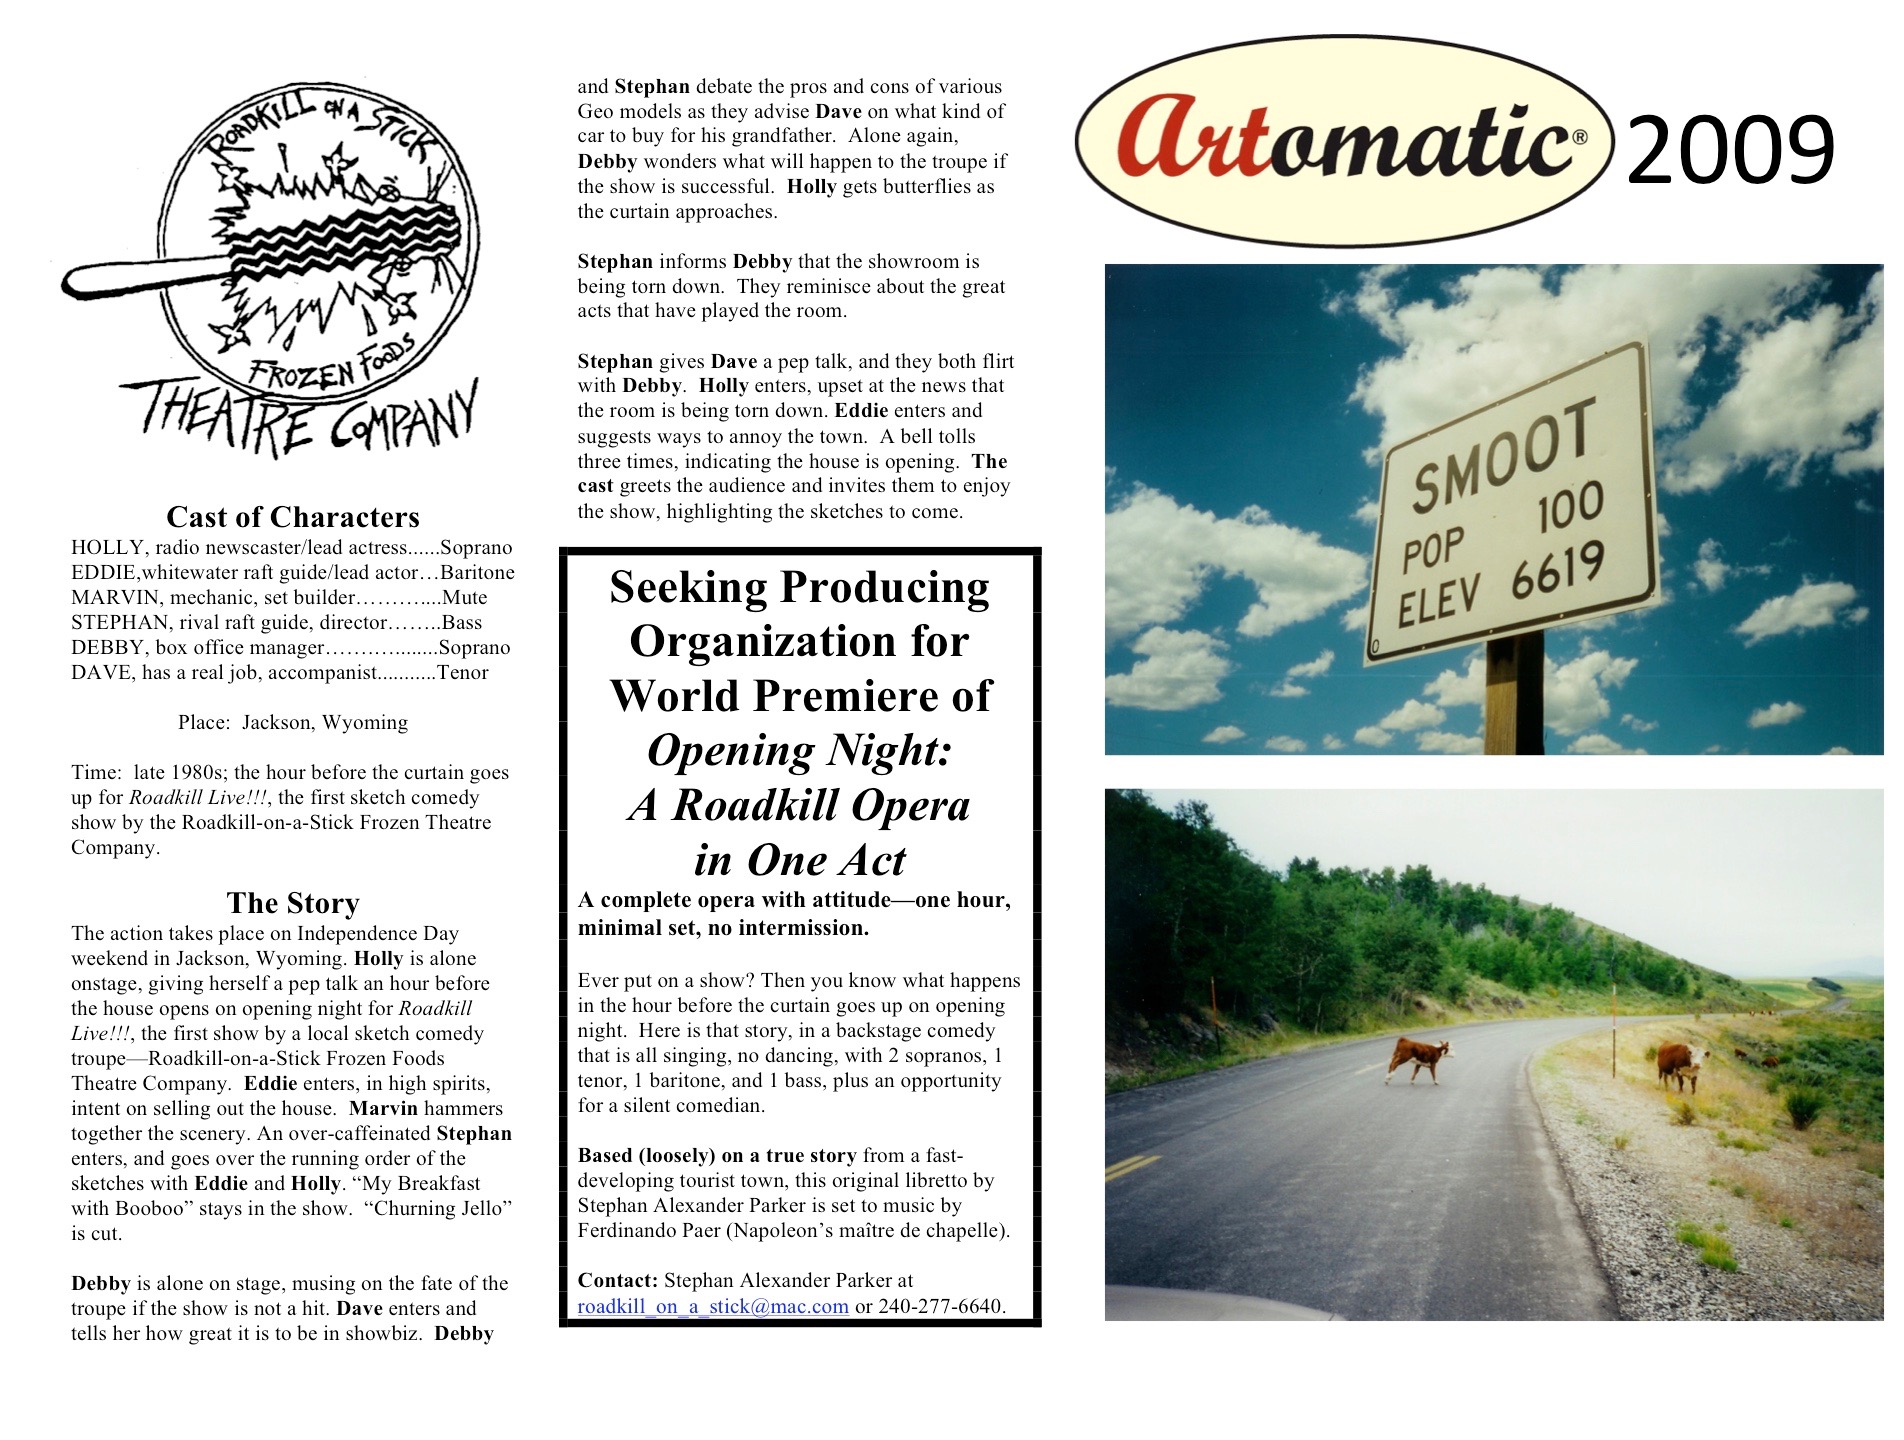 On the left is a copy of the flyer with the logo from the Roadkill On A Stick Frozen Foods Theater Company, a synopsis of the show, and a box that says in bold print Seeking Producing Organization for World Premiere of Opening Night: A Roadkill Opera in One Act. On the right is the Artomatic logo, a photo of a road sign that says Smoot, Population 100, Elevation 6619, and a photo of beef cattle on the road and on the shoulder of a country road